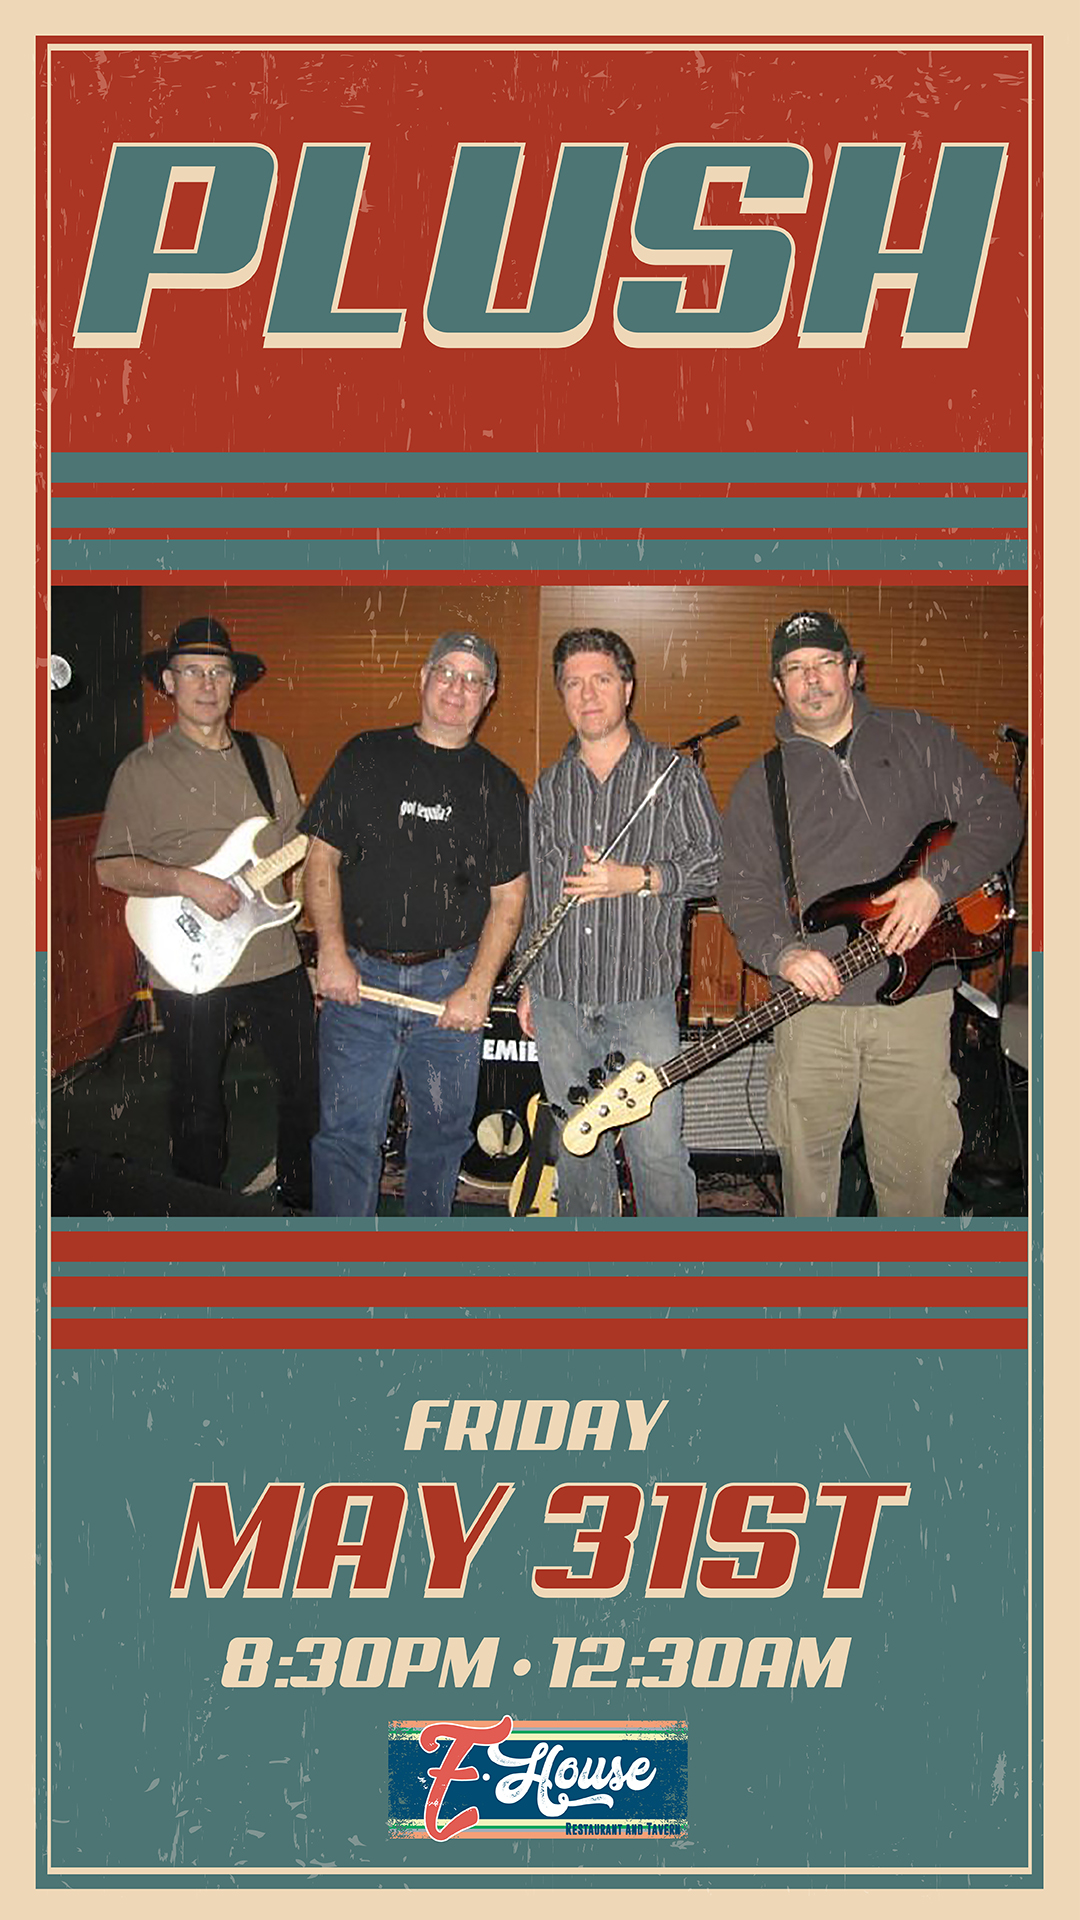 Poster of the band "plush" featuring four members posing with instruments, set for a performance on friday at the e-house, from 8:30 pm to 12:30 am.